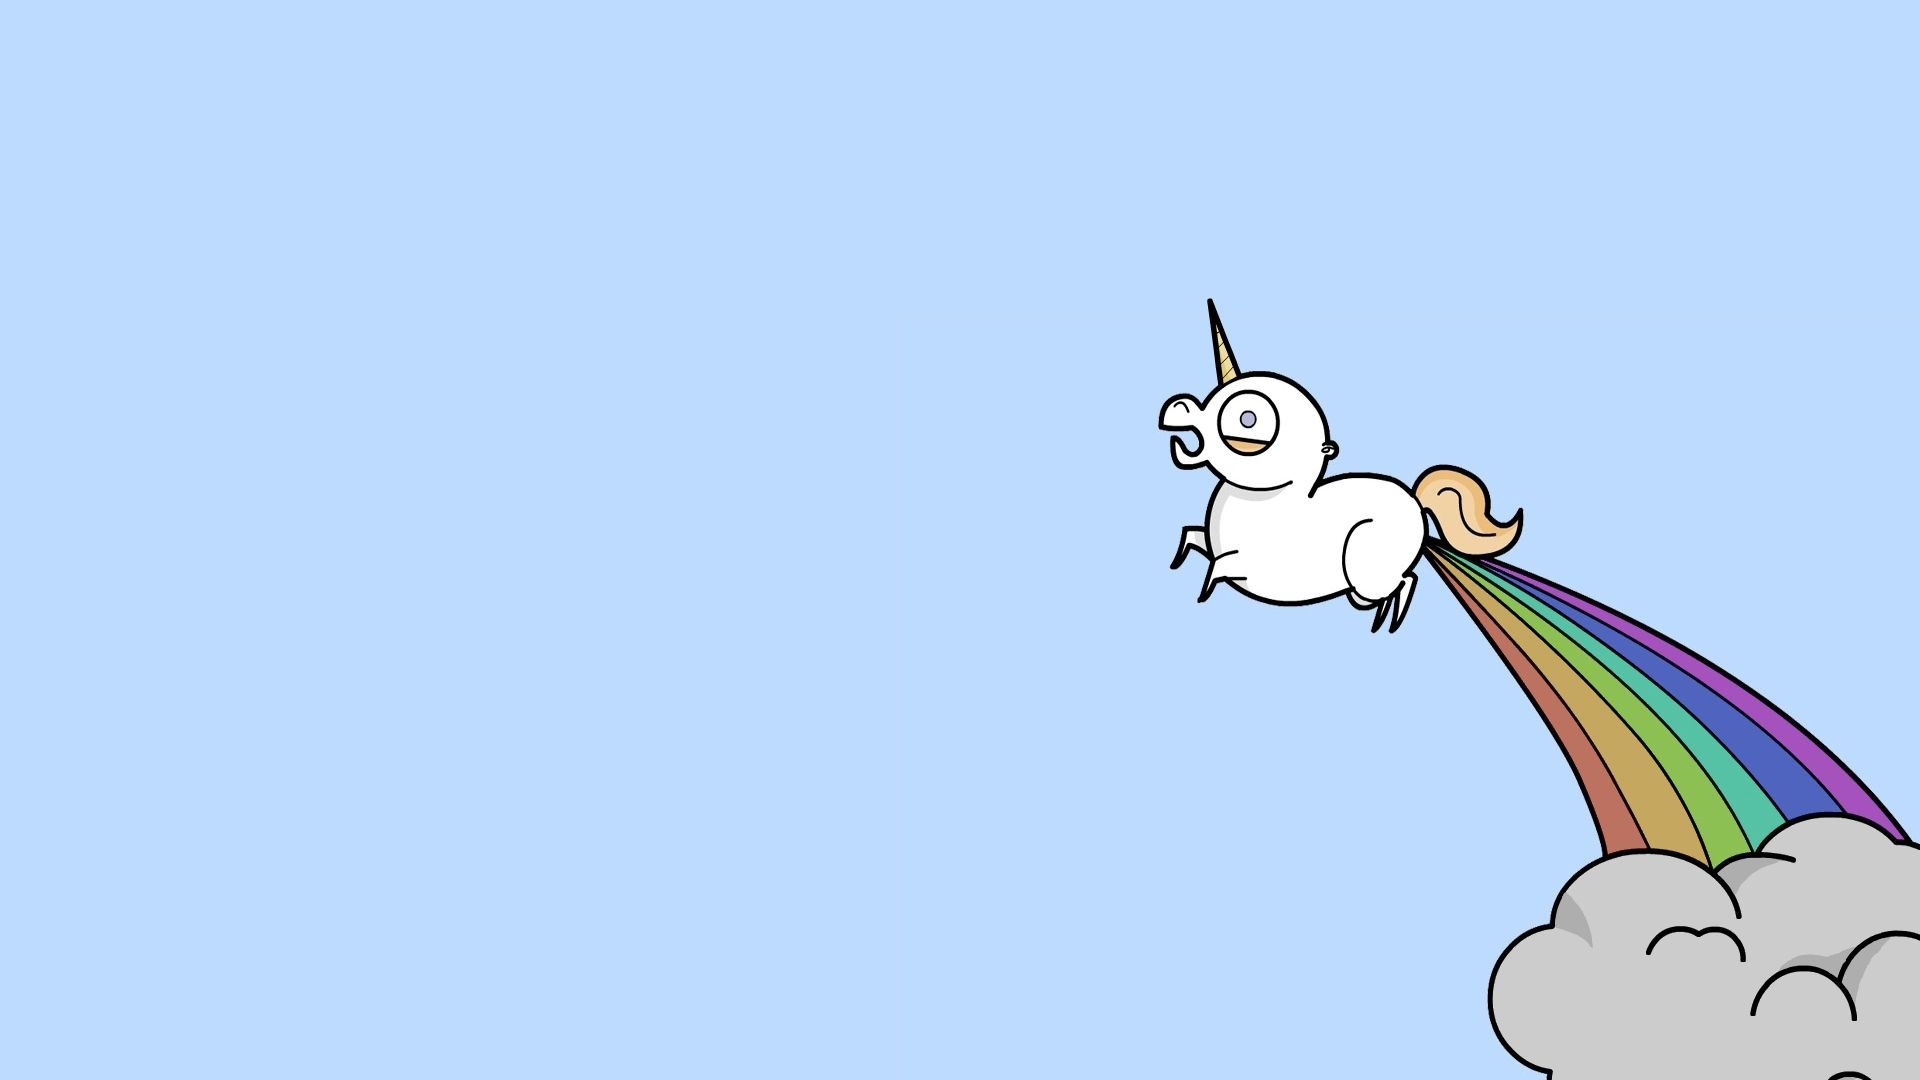 1920x1080 Lovely Unicorn - Wallpaper, High Definition, High Quality, Widescreen